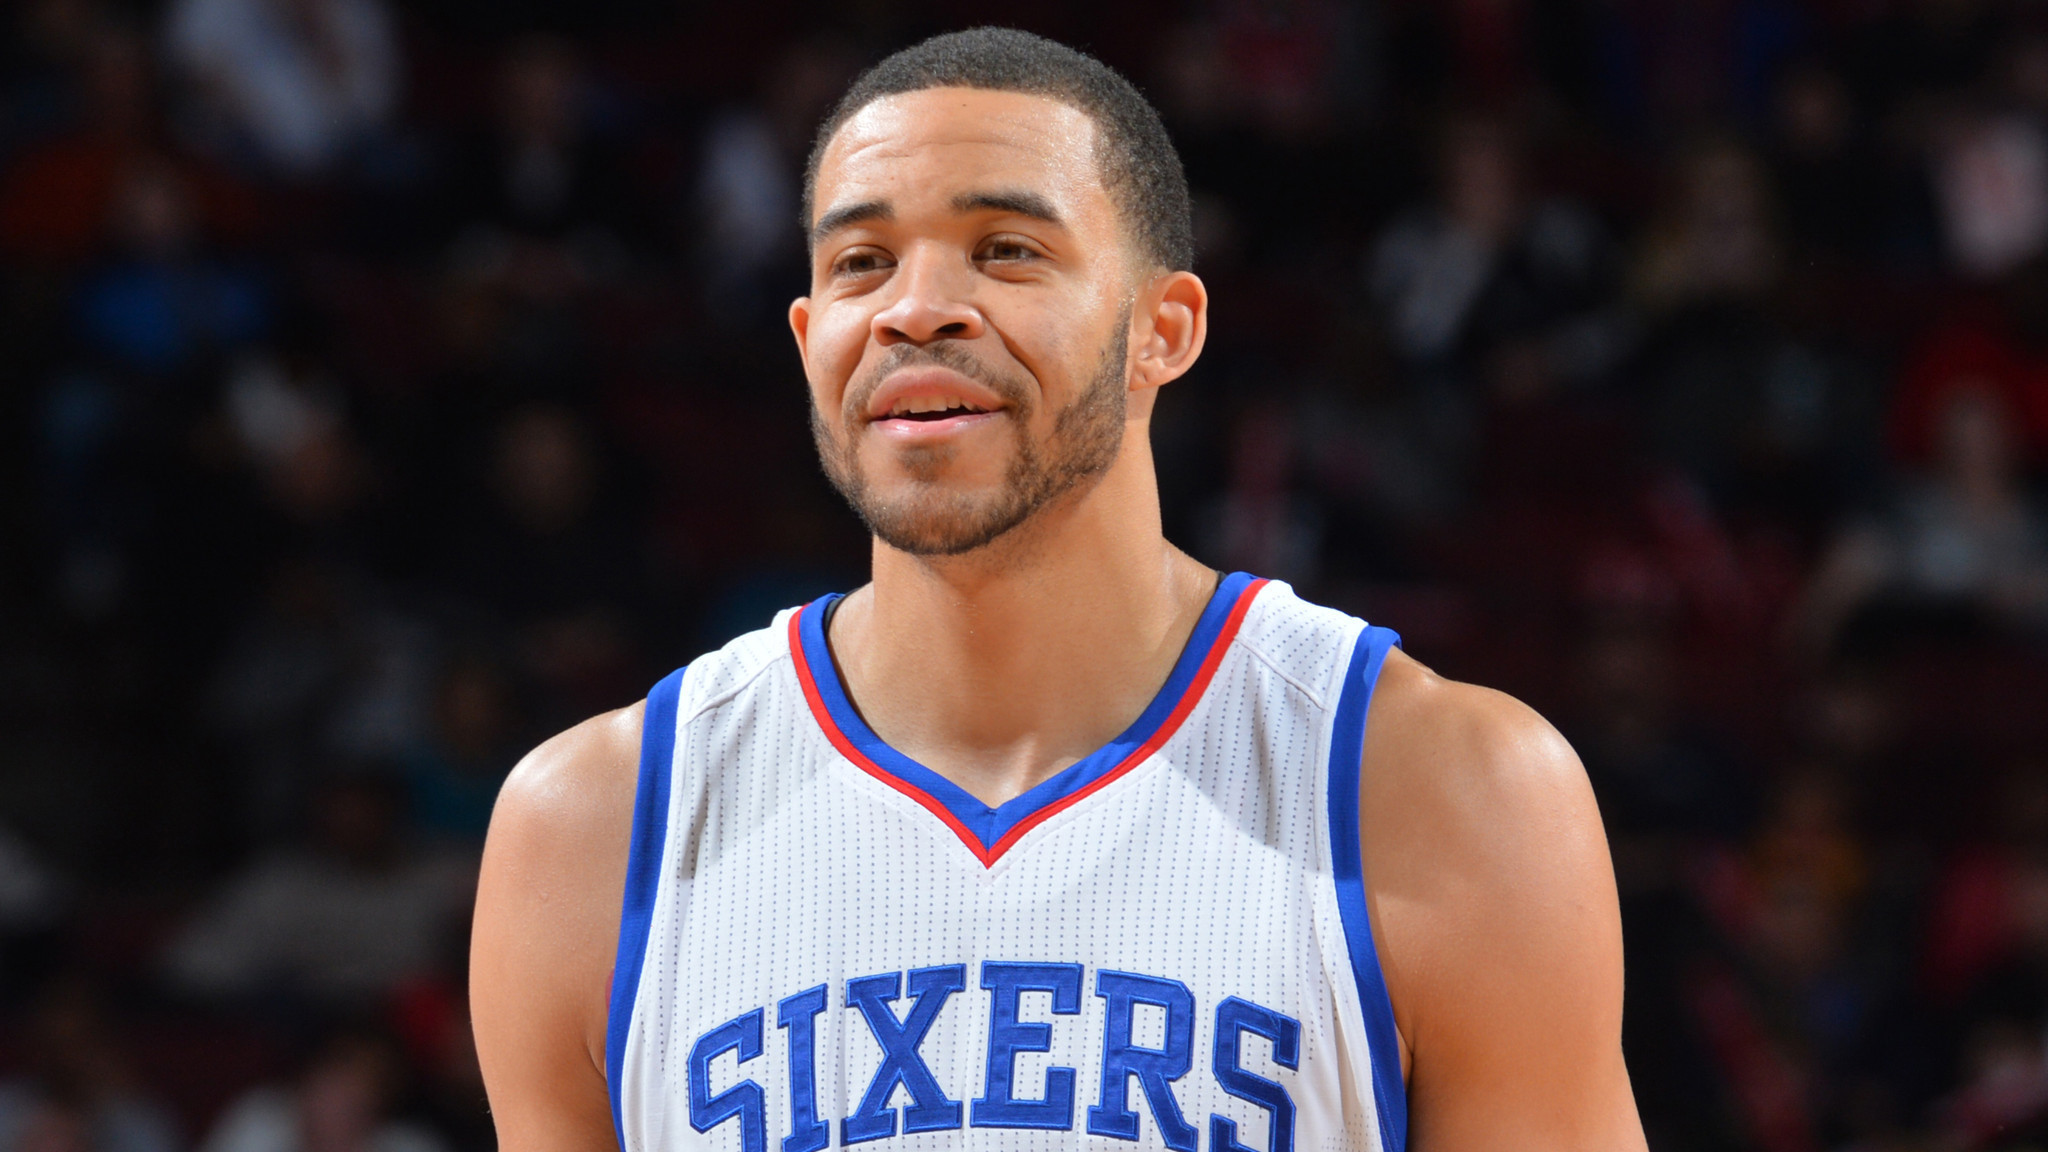 Clippers consider JaVale McGee in wake of DeAndre Jordan's departure - LA Times2048 x 1152